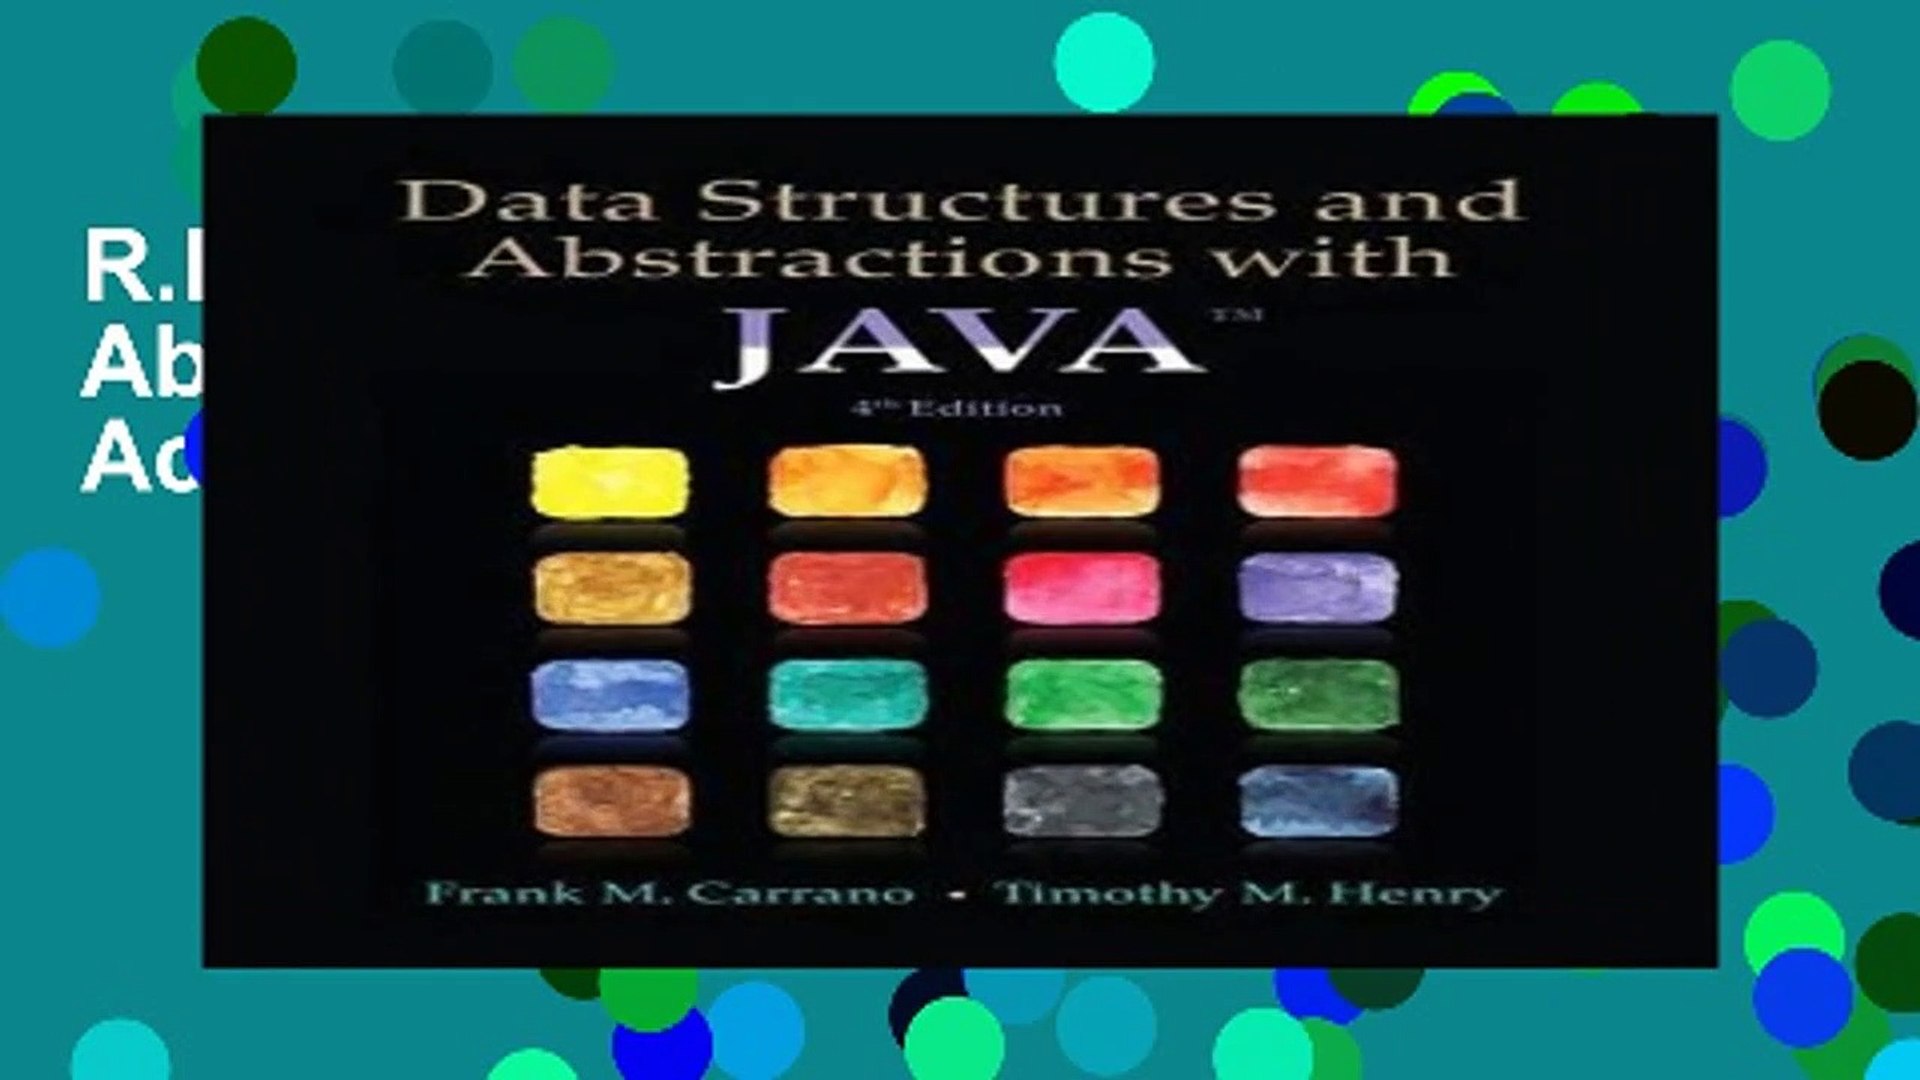 R.E.A.D Data Structures and Abstractions with Java Full Access